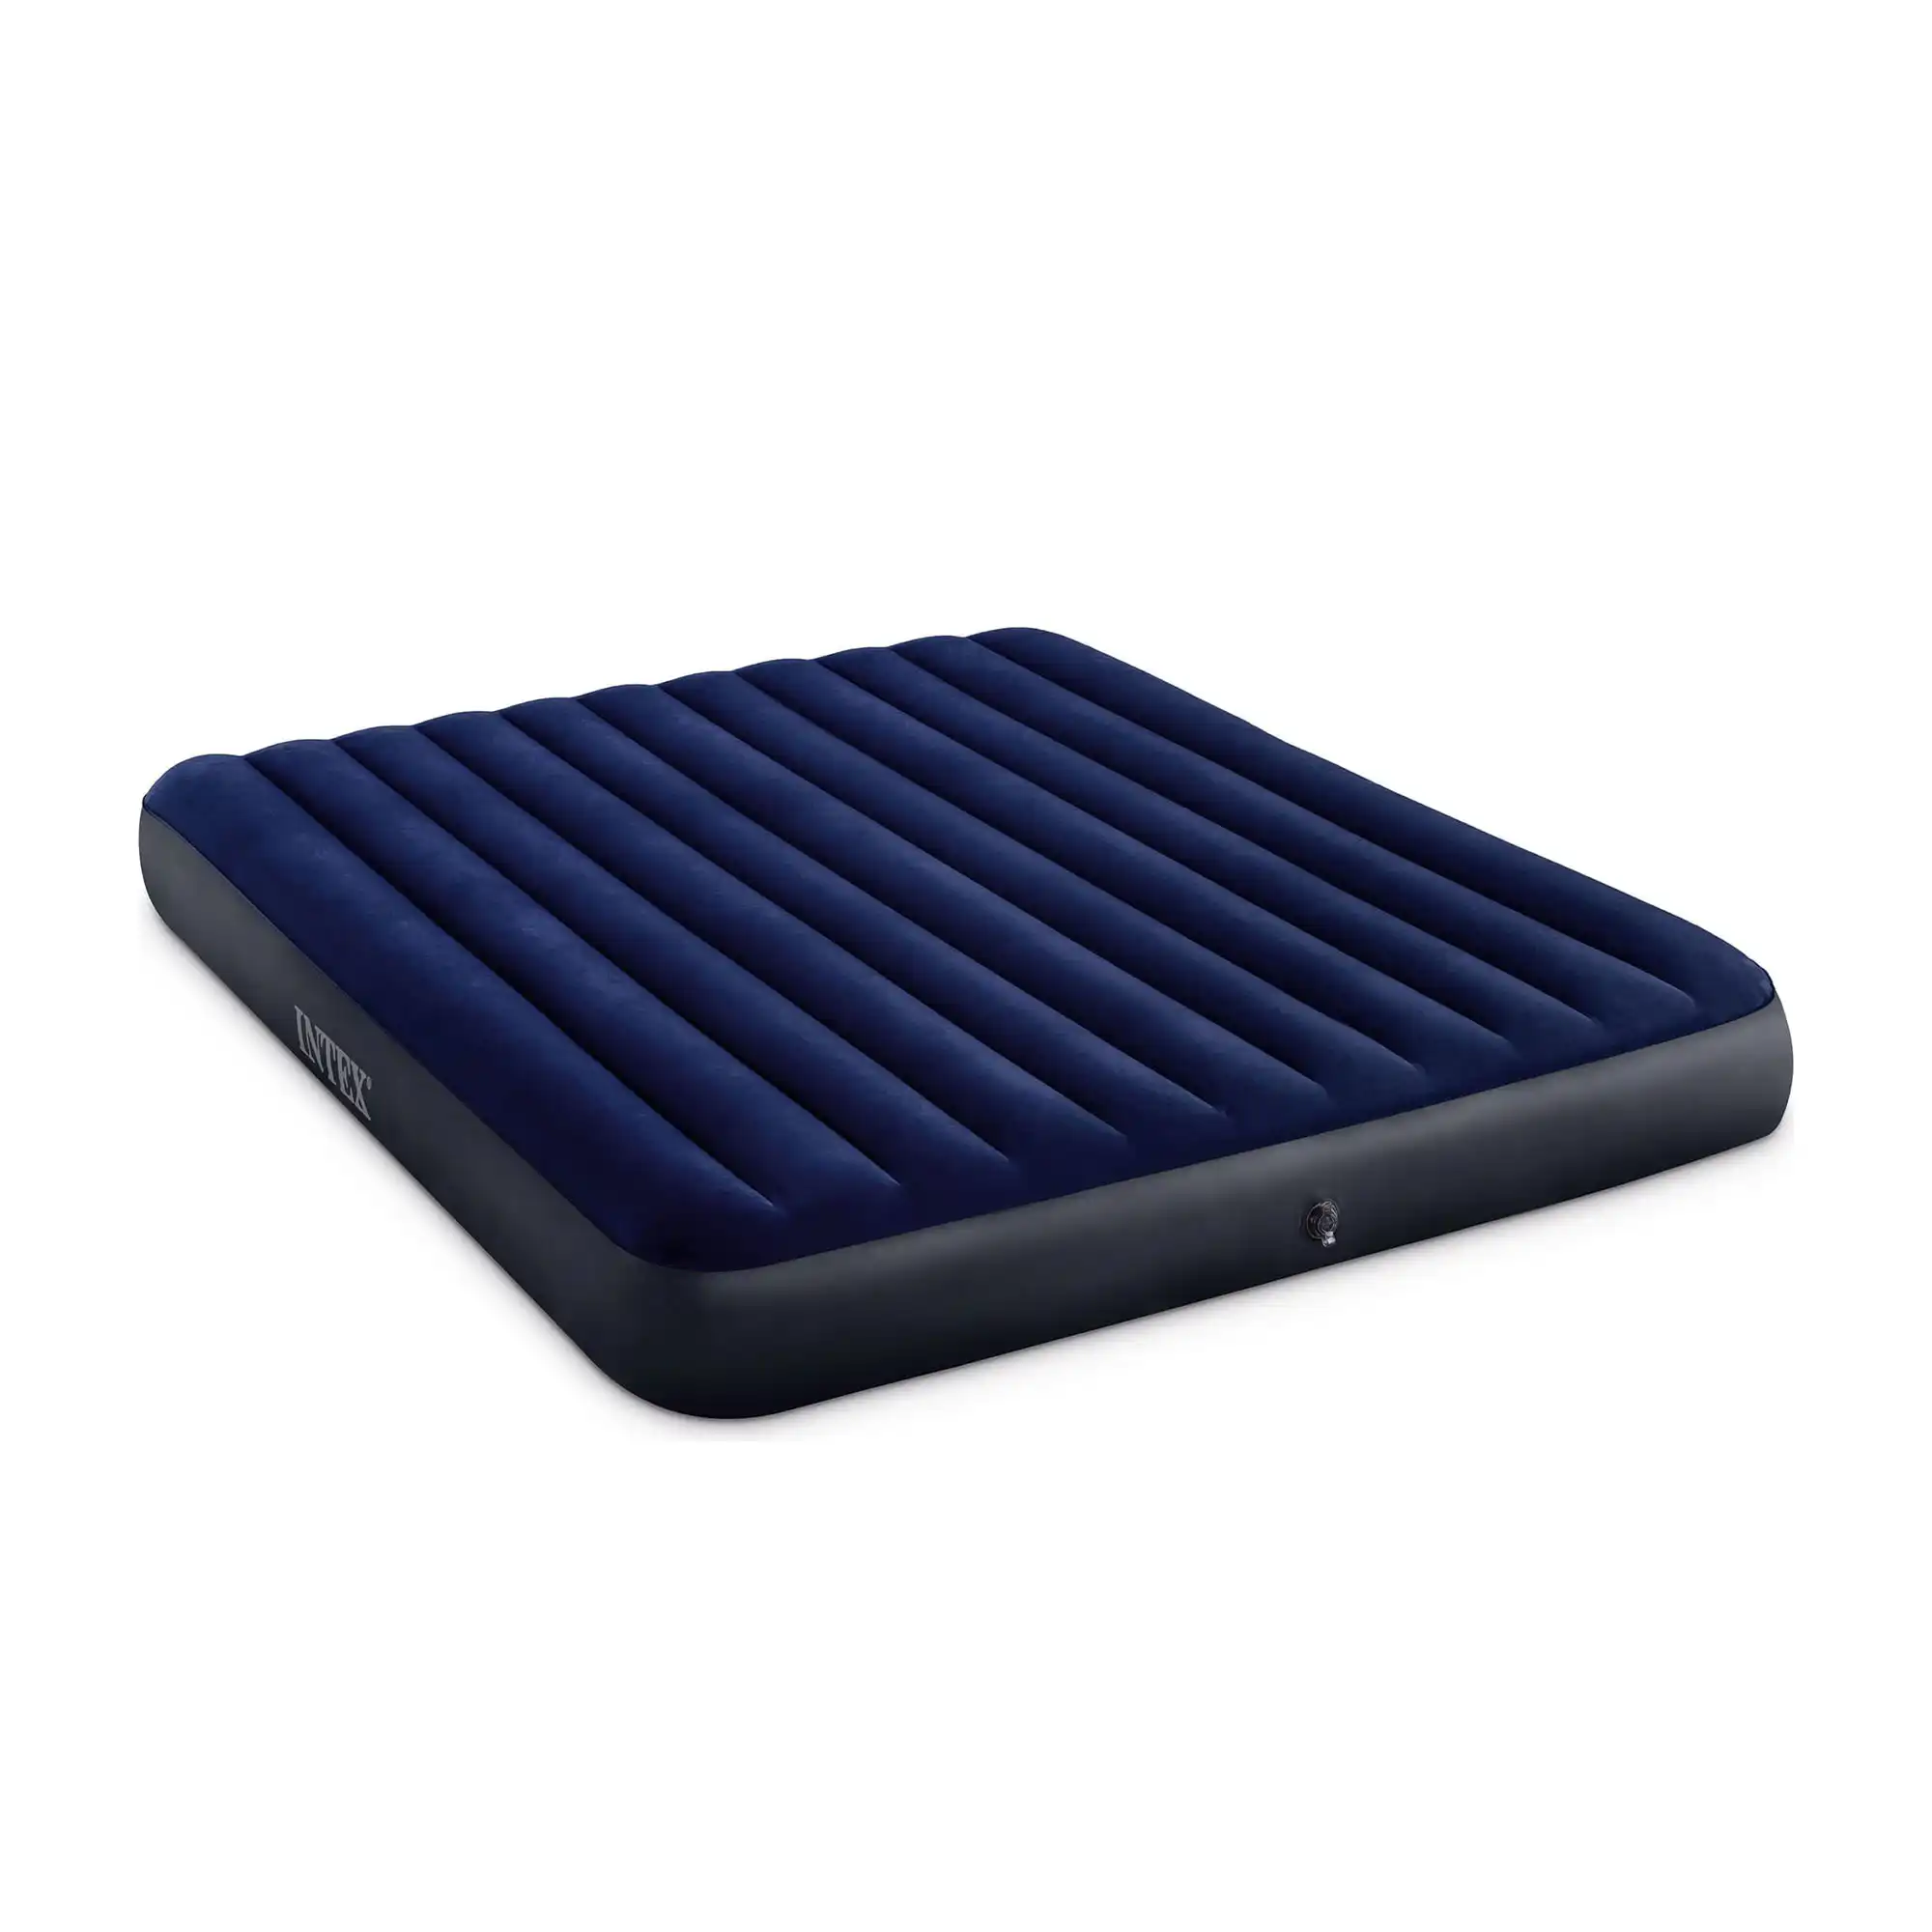 King Dura-Beam Series Classic Downy Airbed